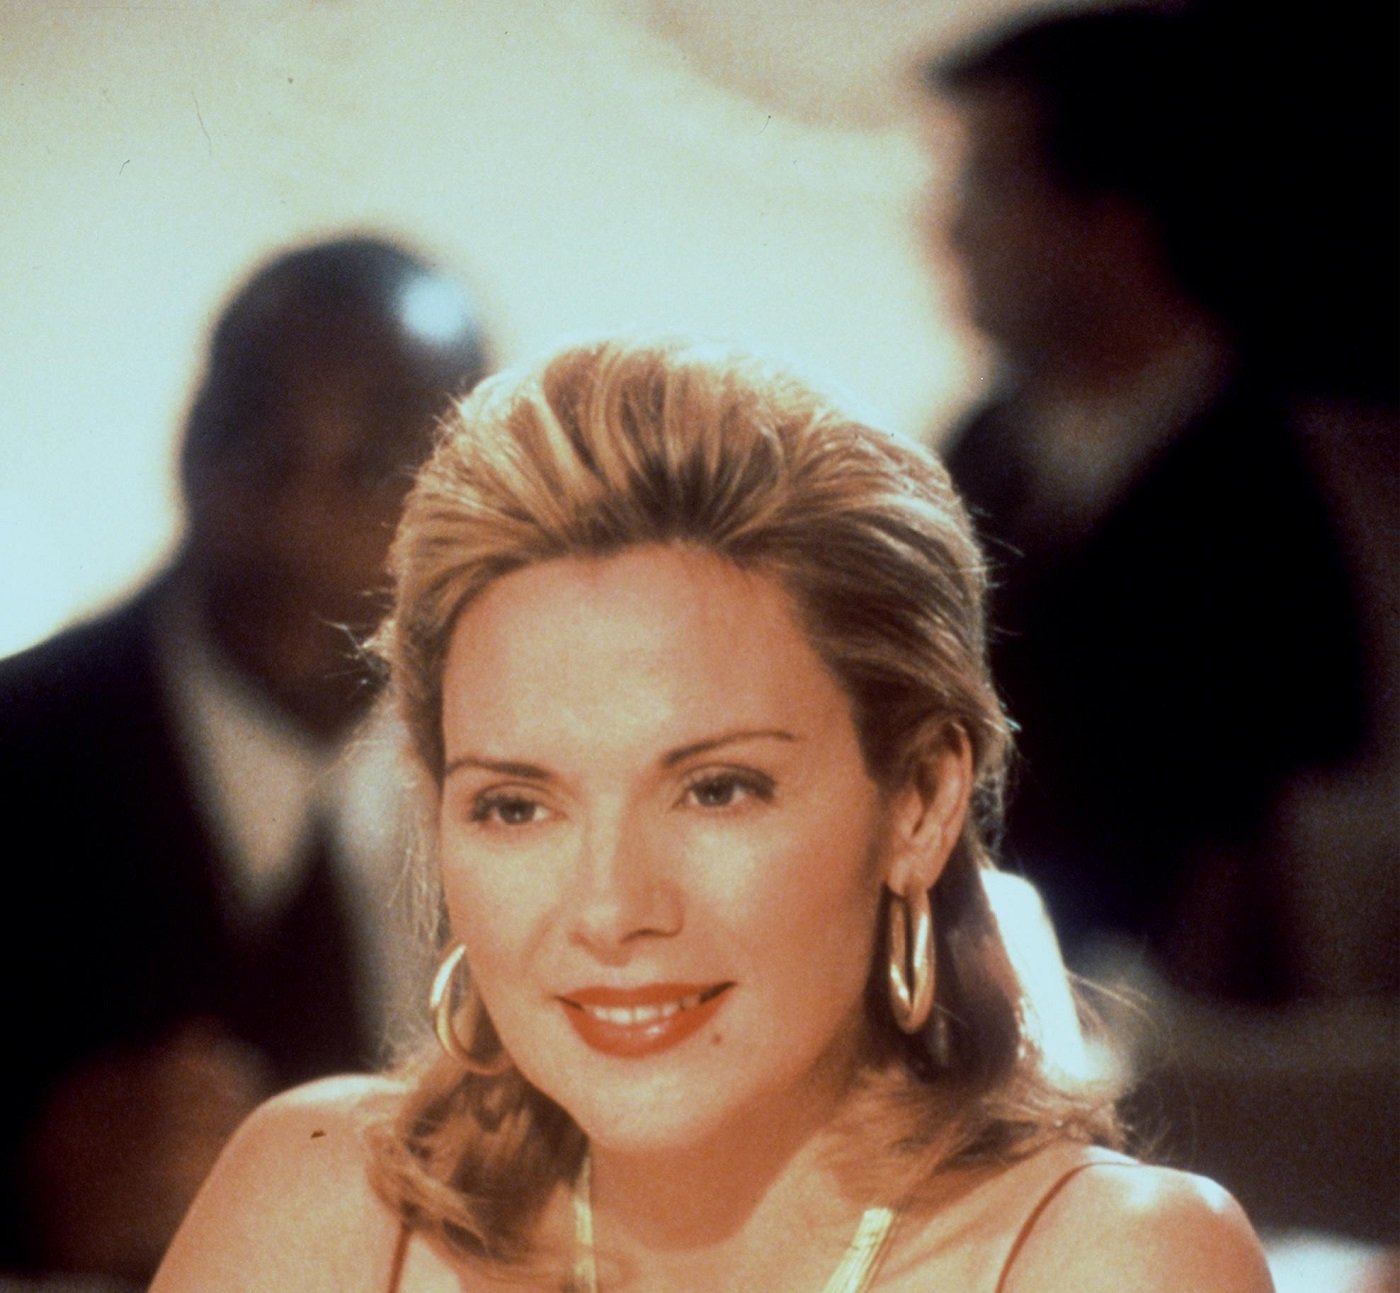 Kim Cattrall as Samantha Jones sits in a restuarant during a scene for 'Sex and the City.' Samantha Jones went on the most dates on 'Sex and the City' 